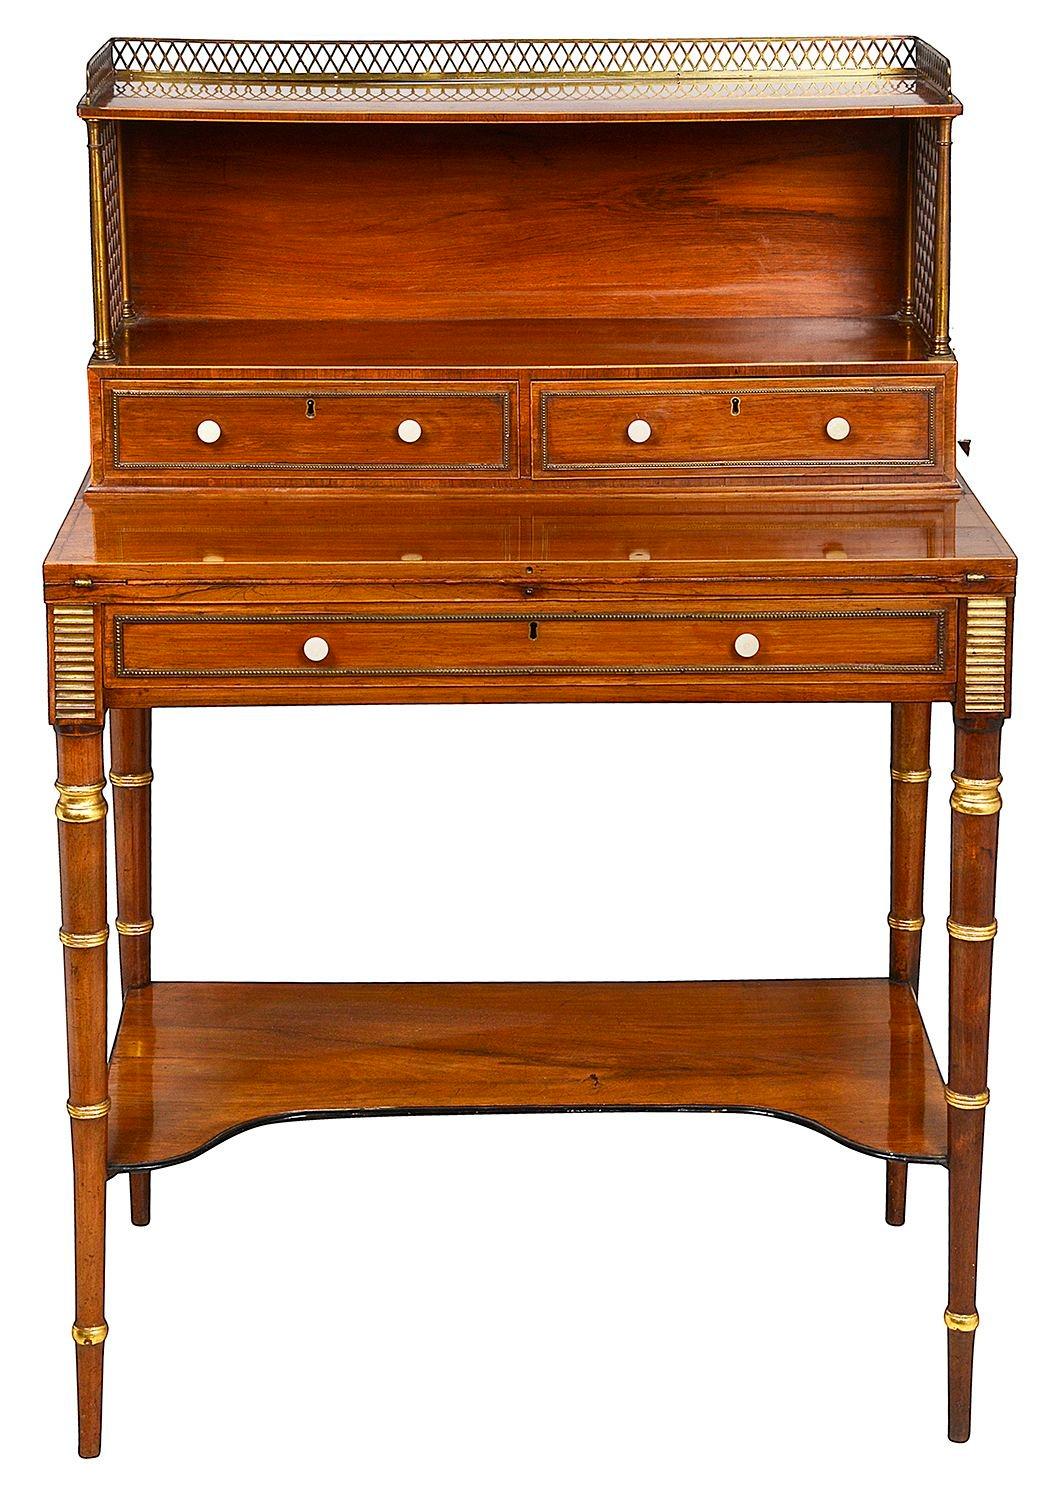 A fine quality and rare pair of Regency period Rosewood Bon huer du Jours. Each with three quarter brass gallery to the top, trellis panels and drawers to the super structure. Hinged writing tablets opening to reveal inset tooled leather, frieze